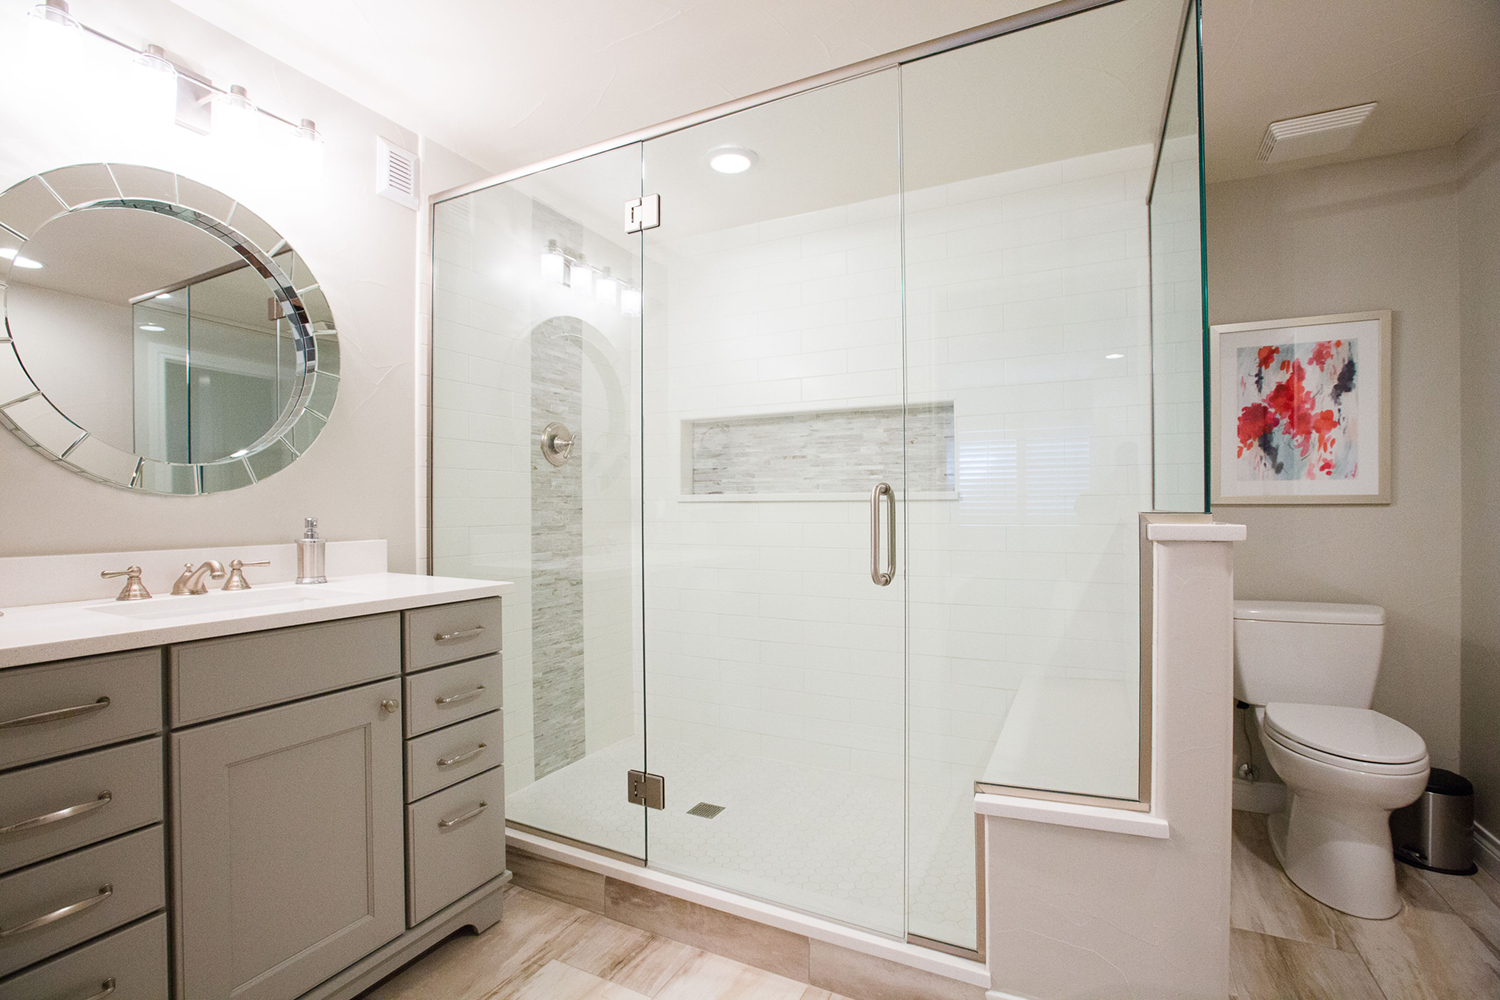 Georgeson Style Bathroom Remodel: Glass Shower